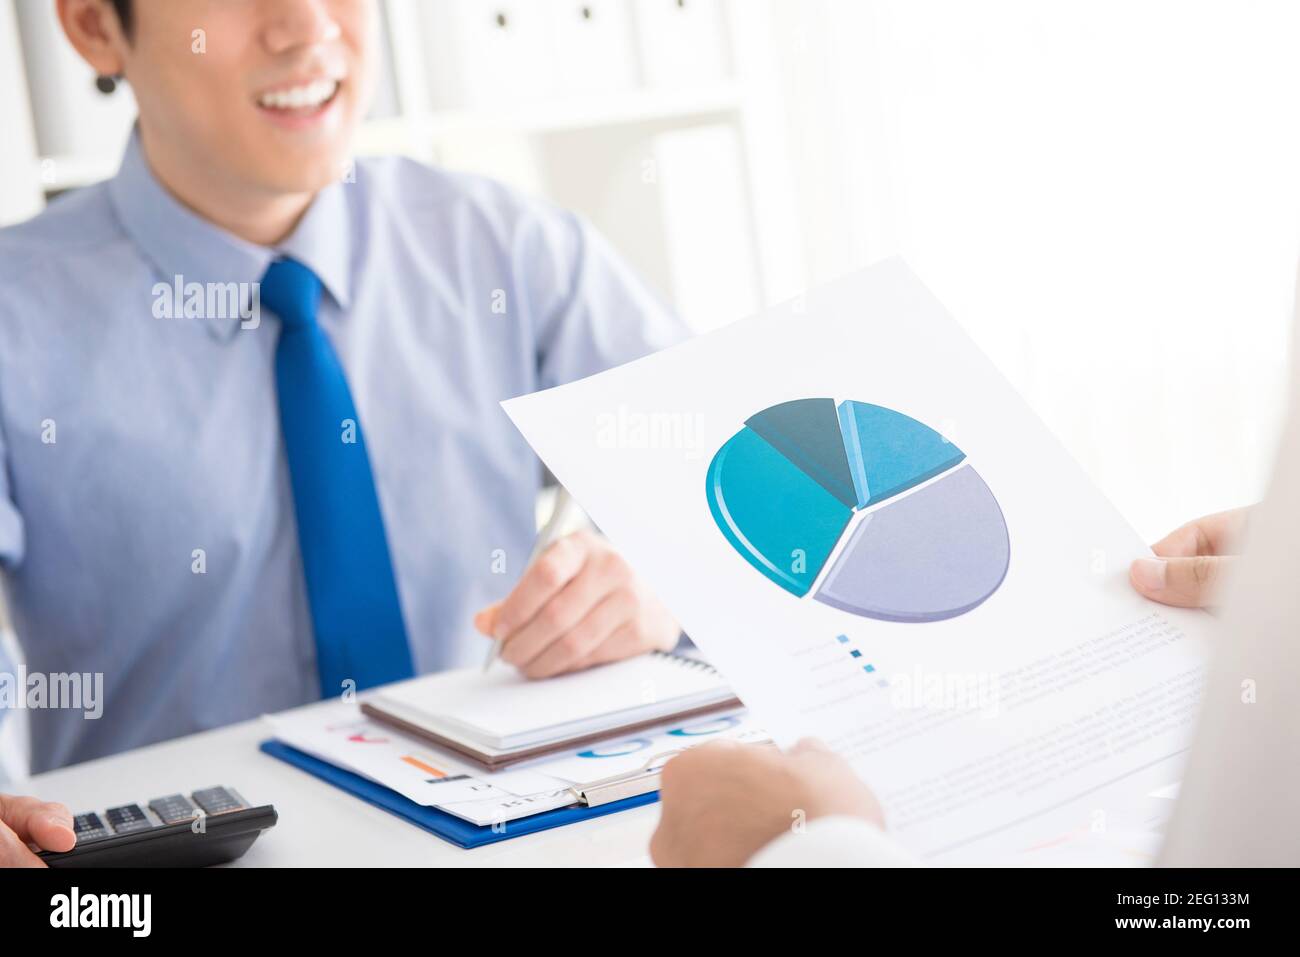 Business people discussing financial document Stock Photo